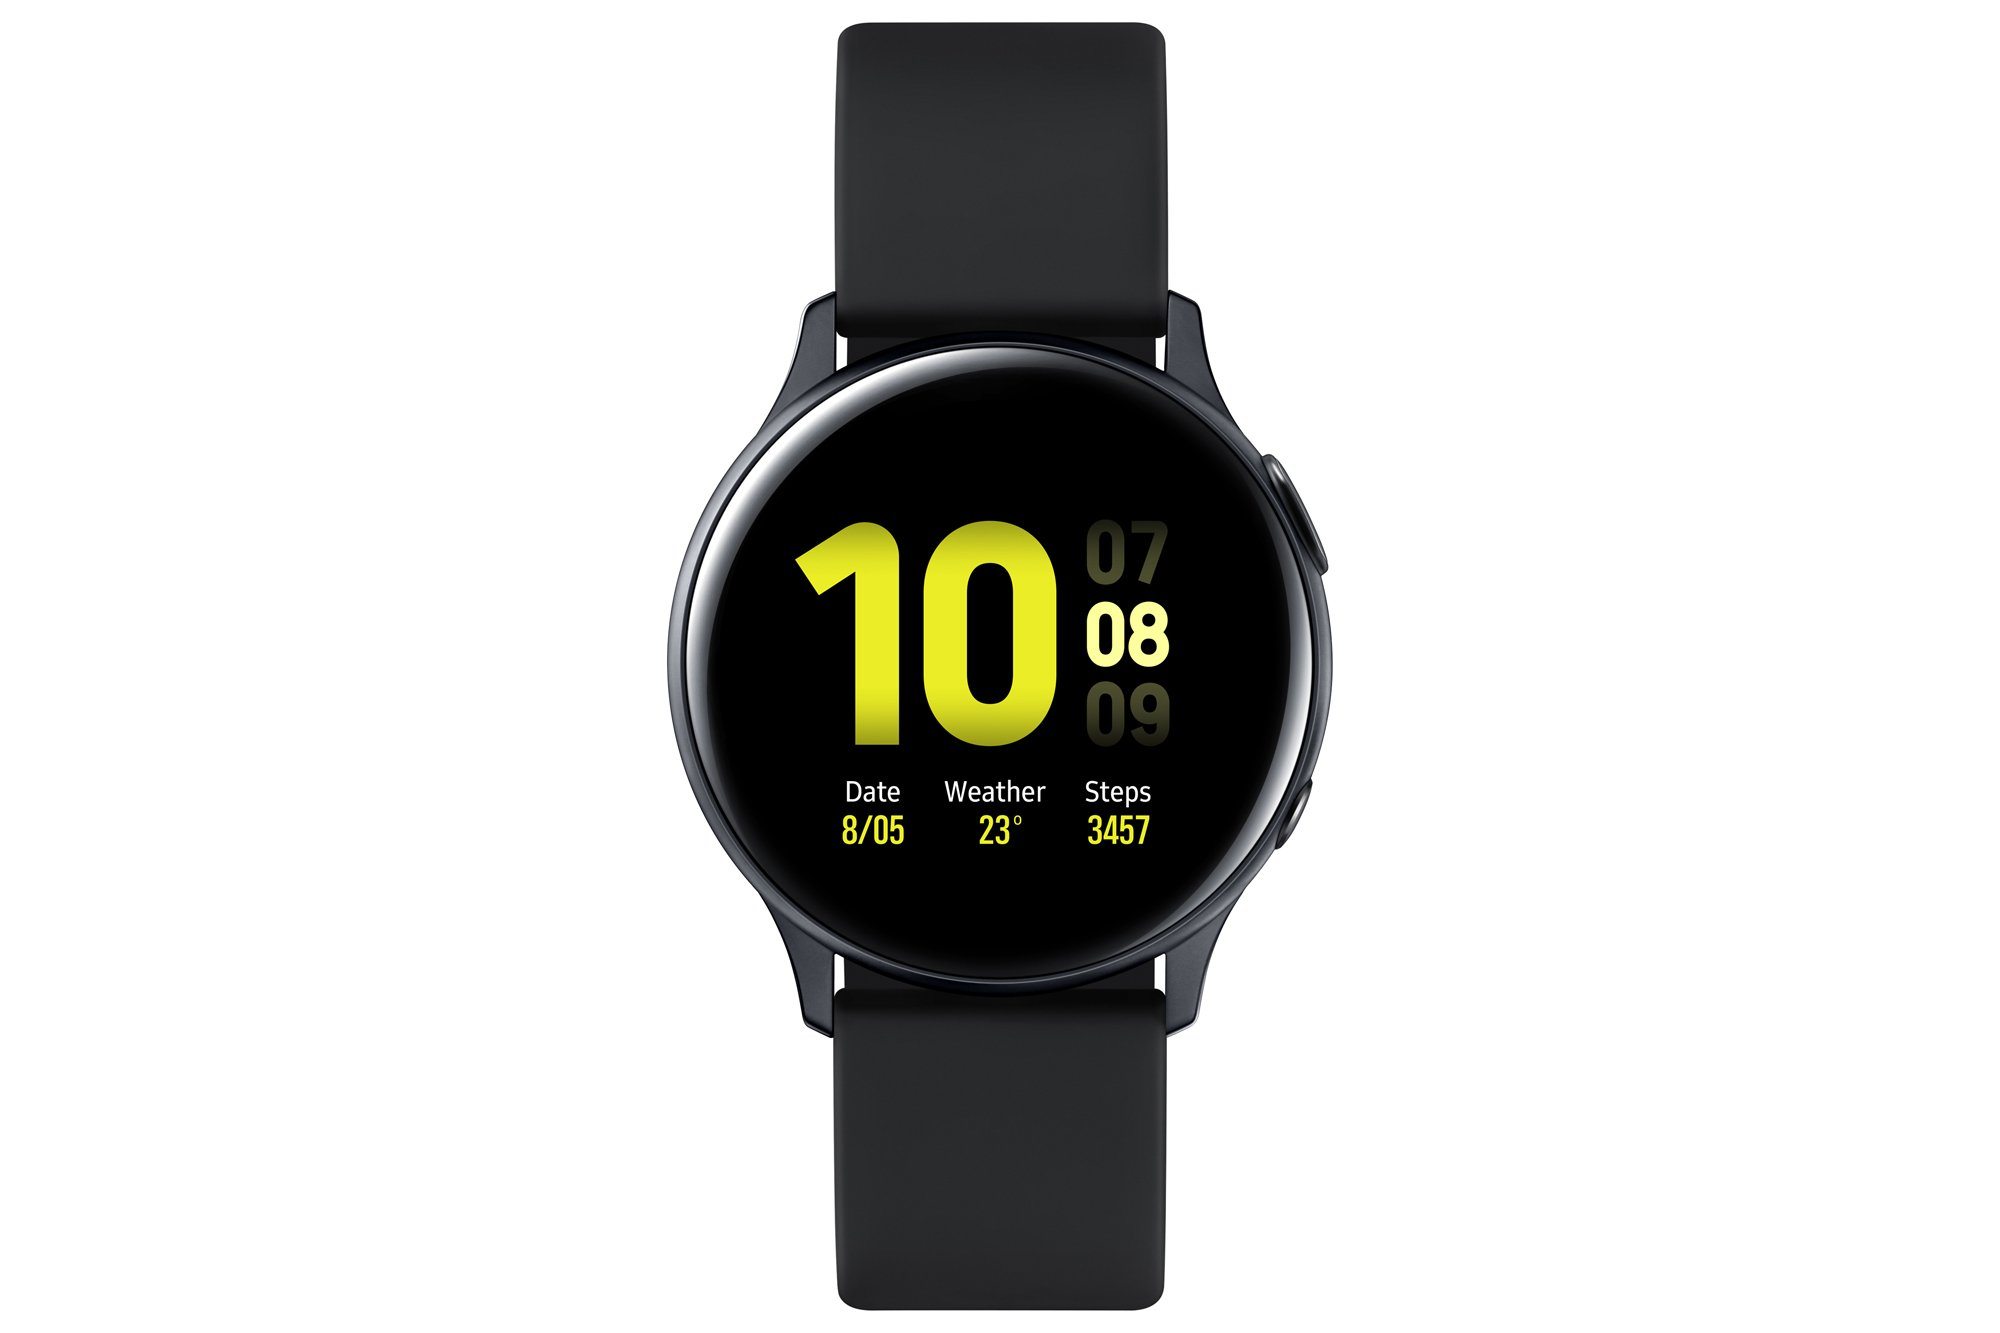 Now Available At Retail - Introducing Galaxy Watch Active2 From Samsung Canada